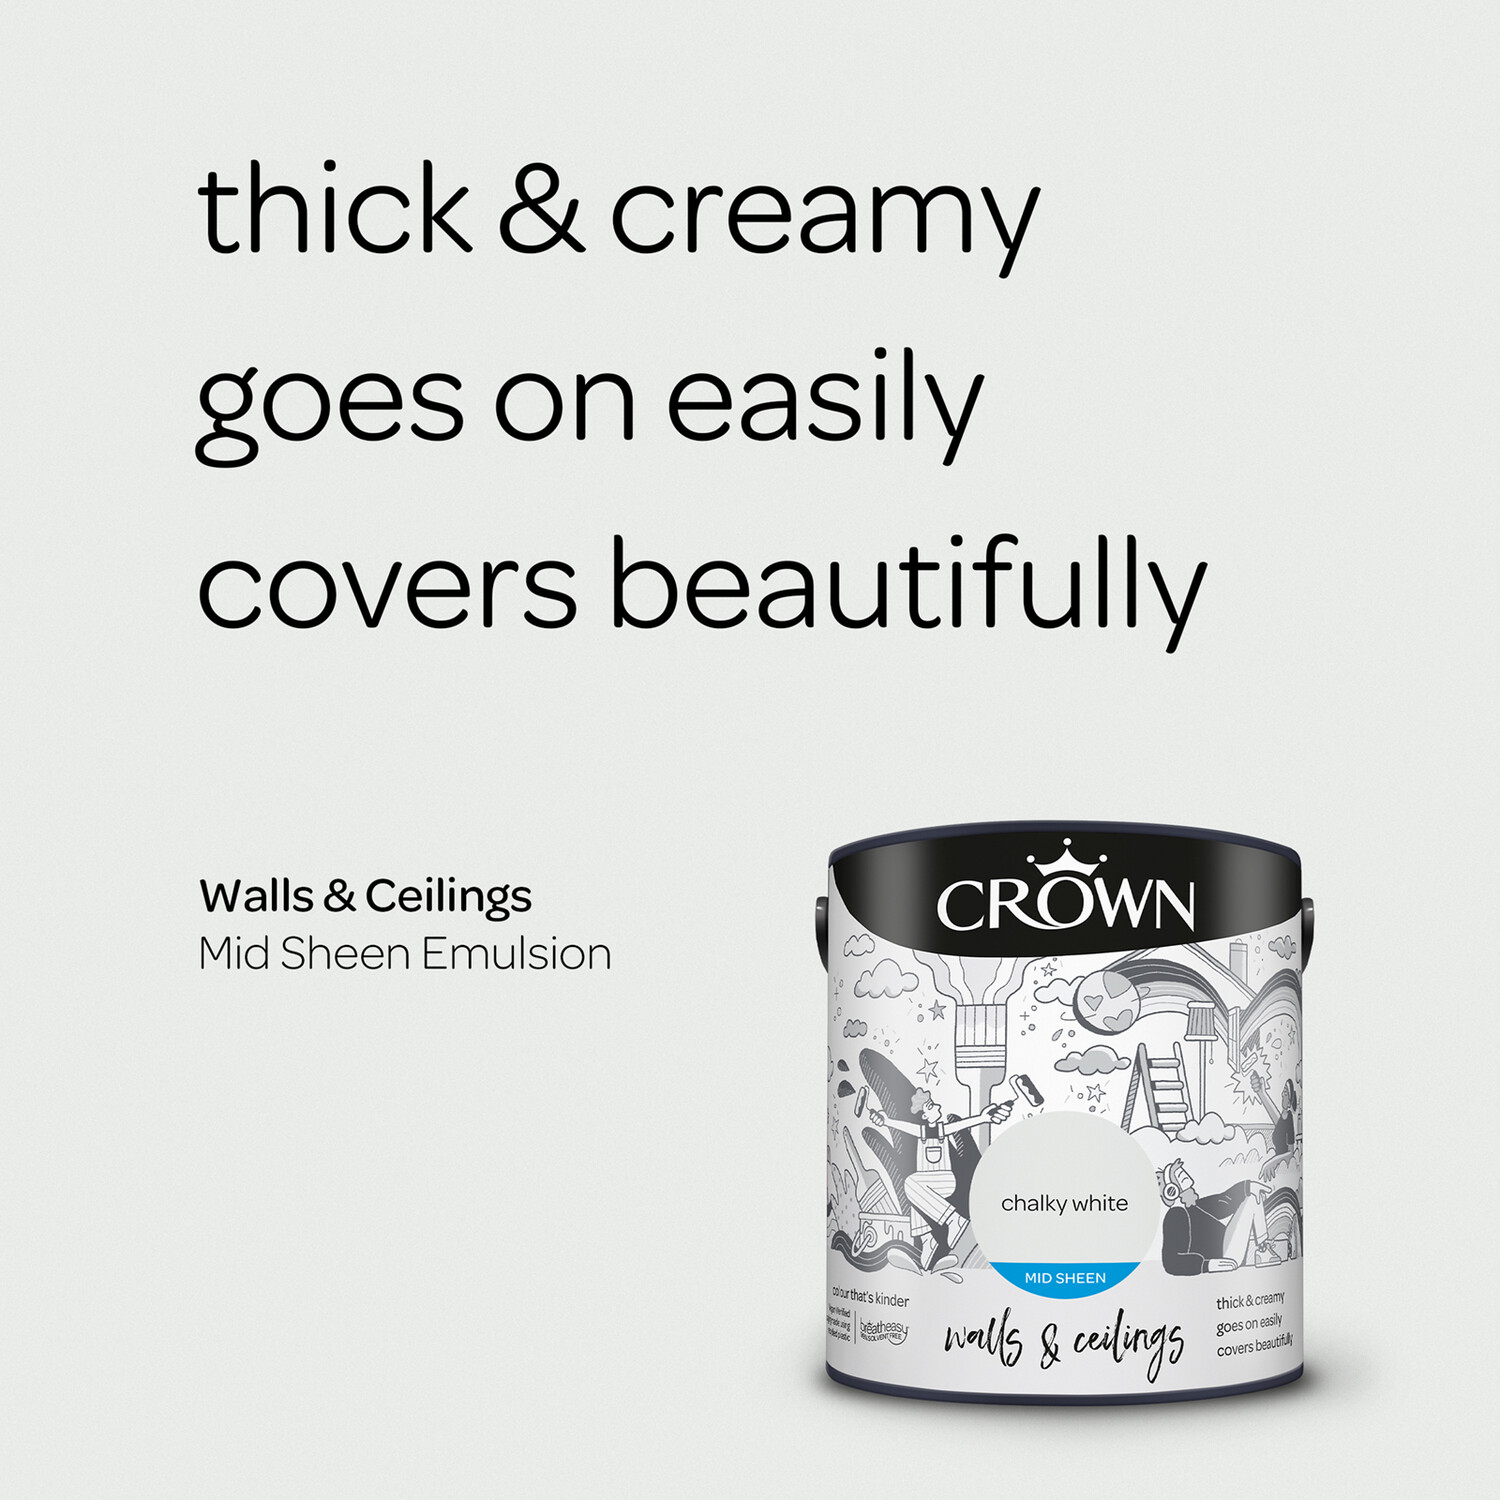 Crown Walls & Ceilings Chalky White Mid Sheen Emulsion Paint 2.5L Image 8